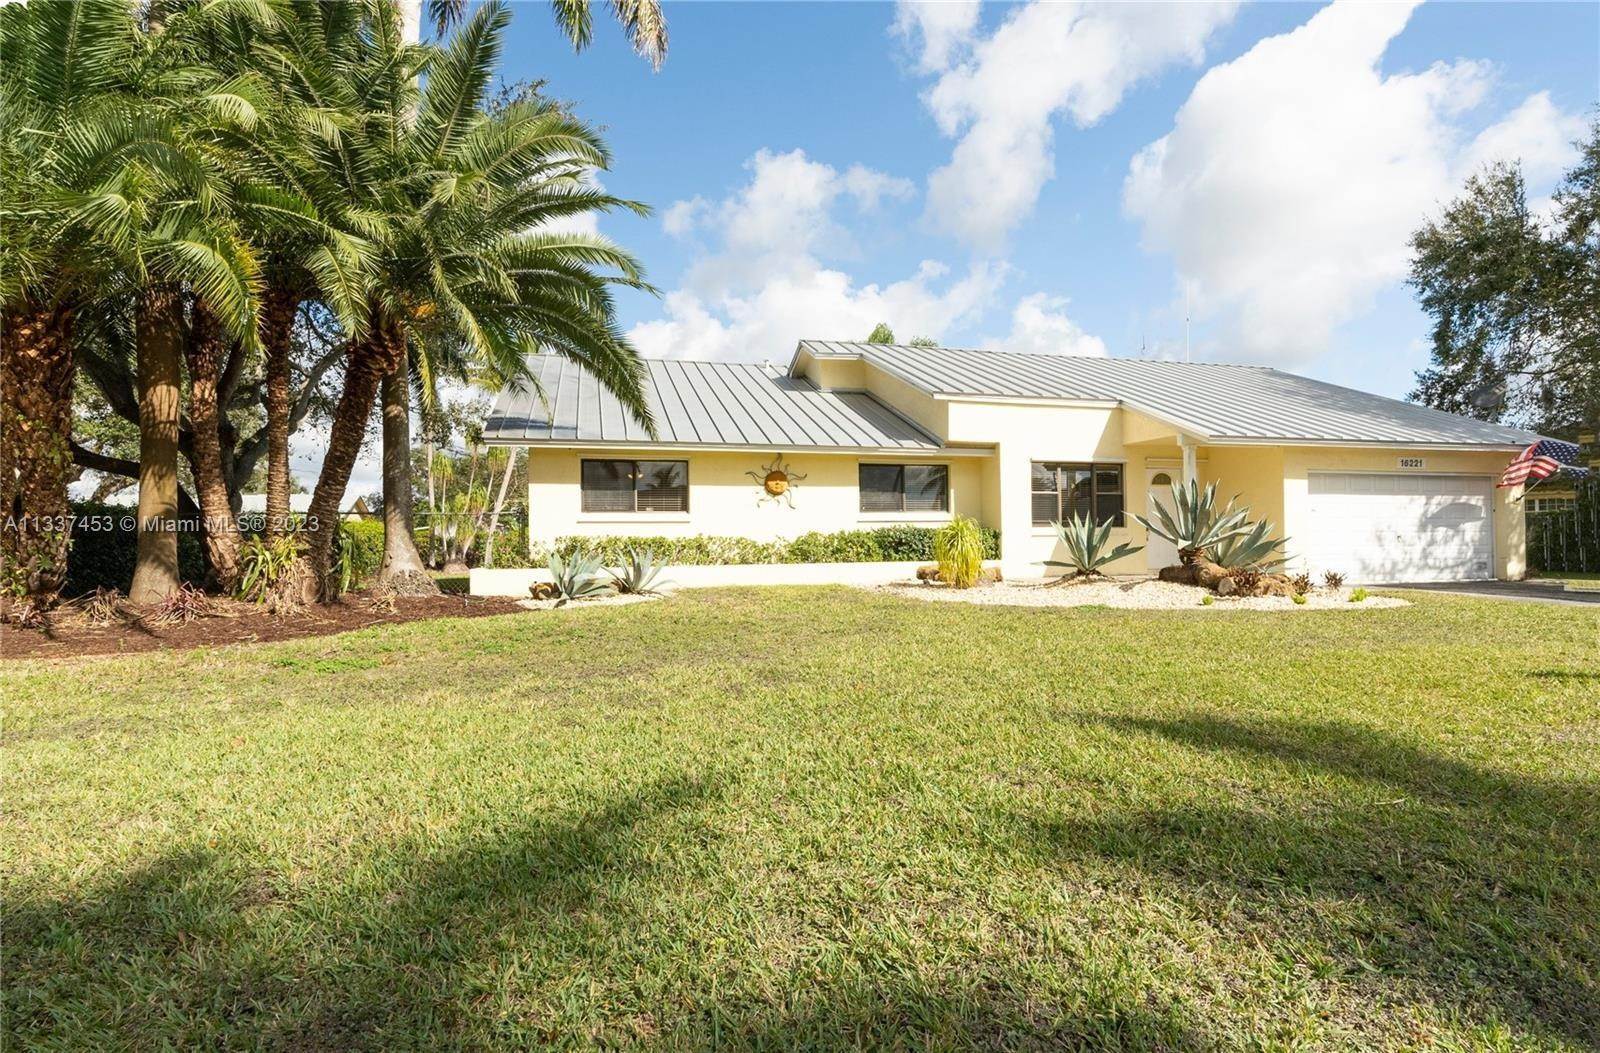 Single Family for Sale at Homestead, FL 33033